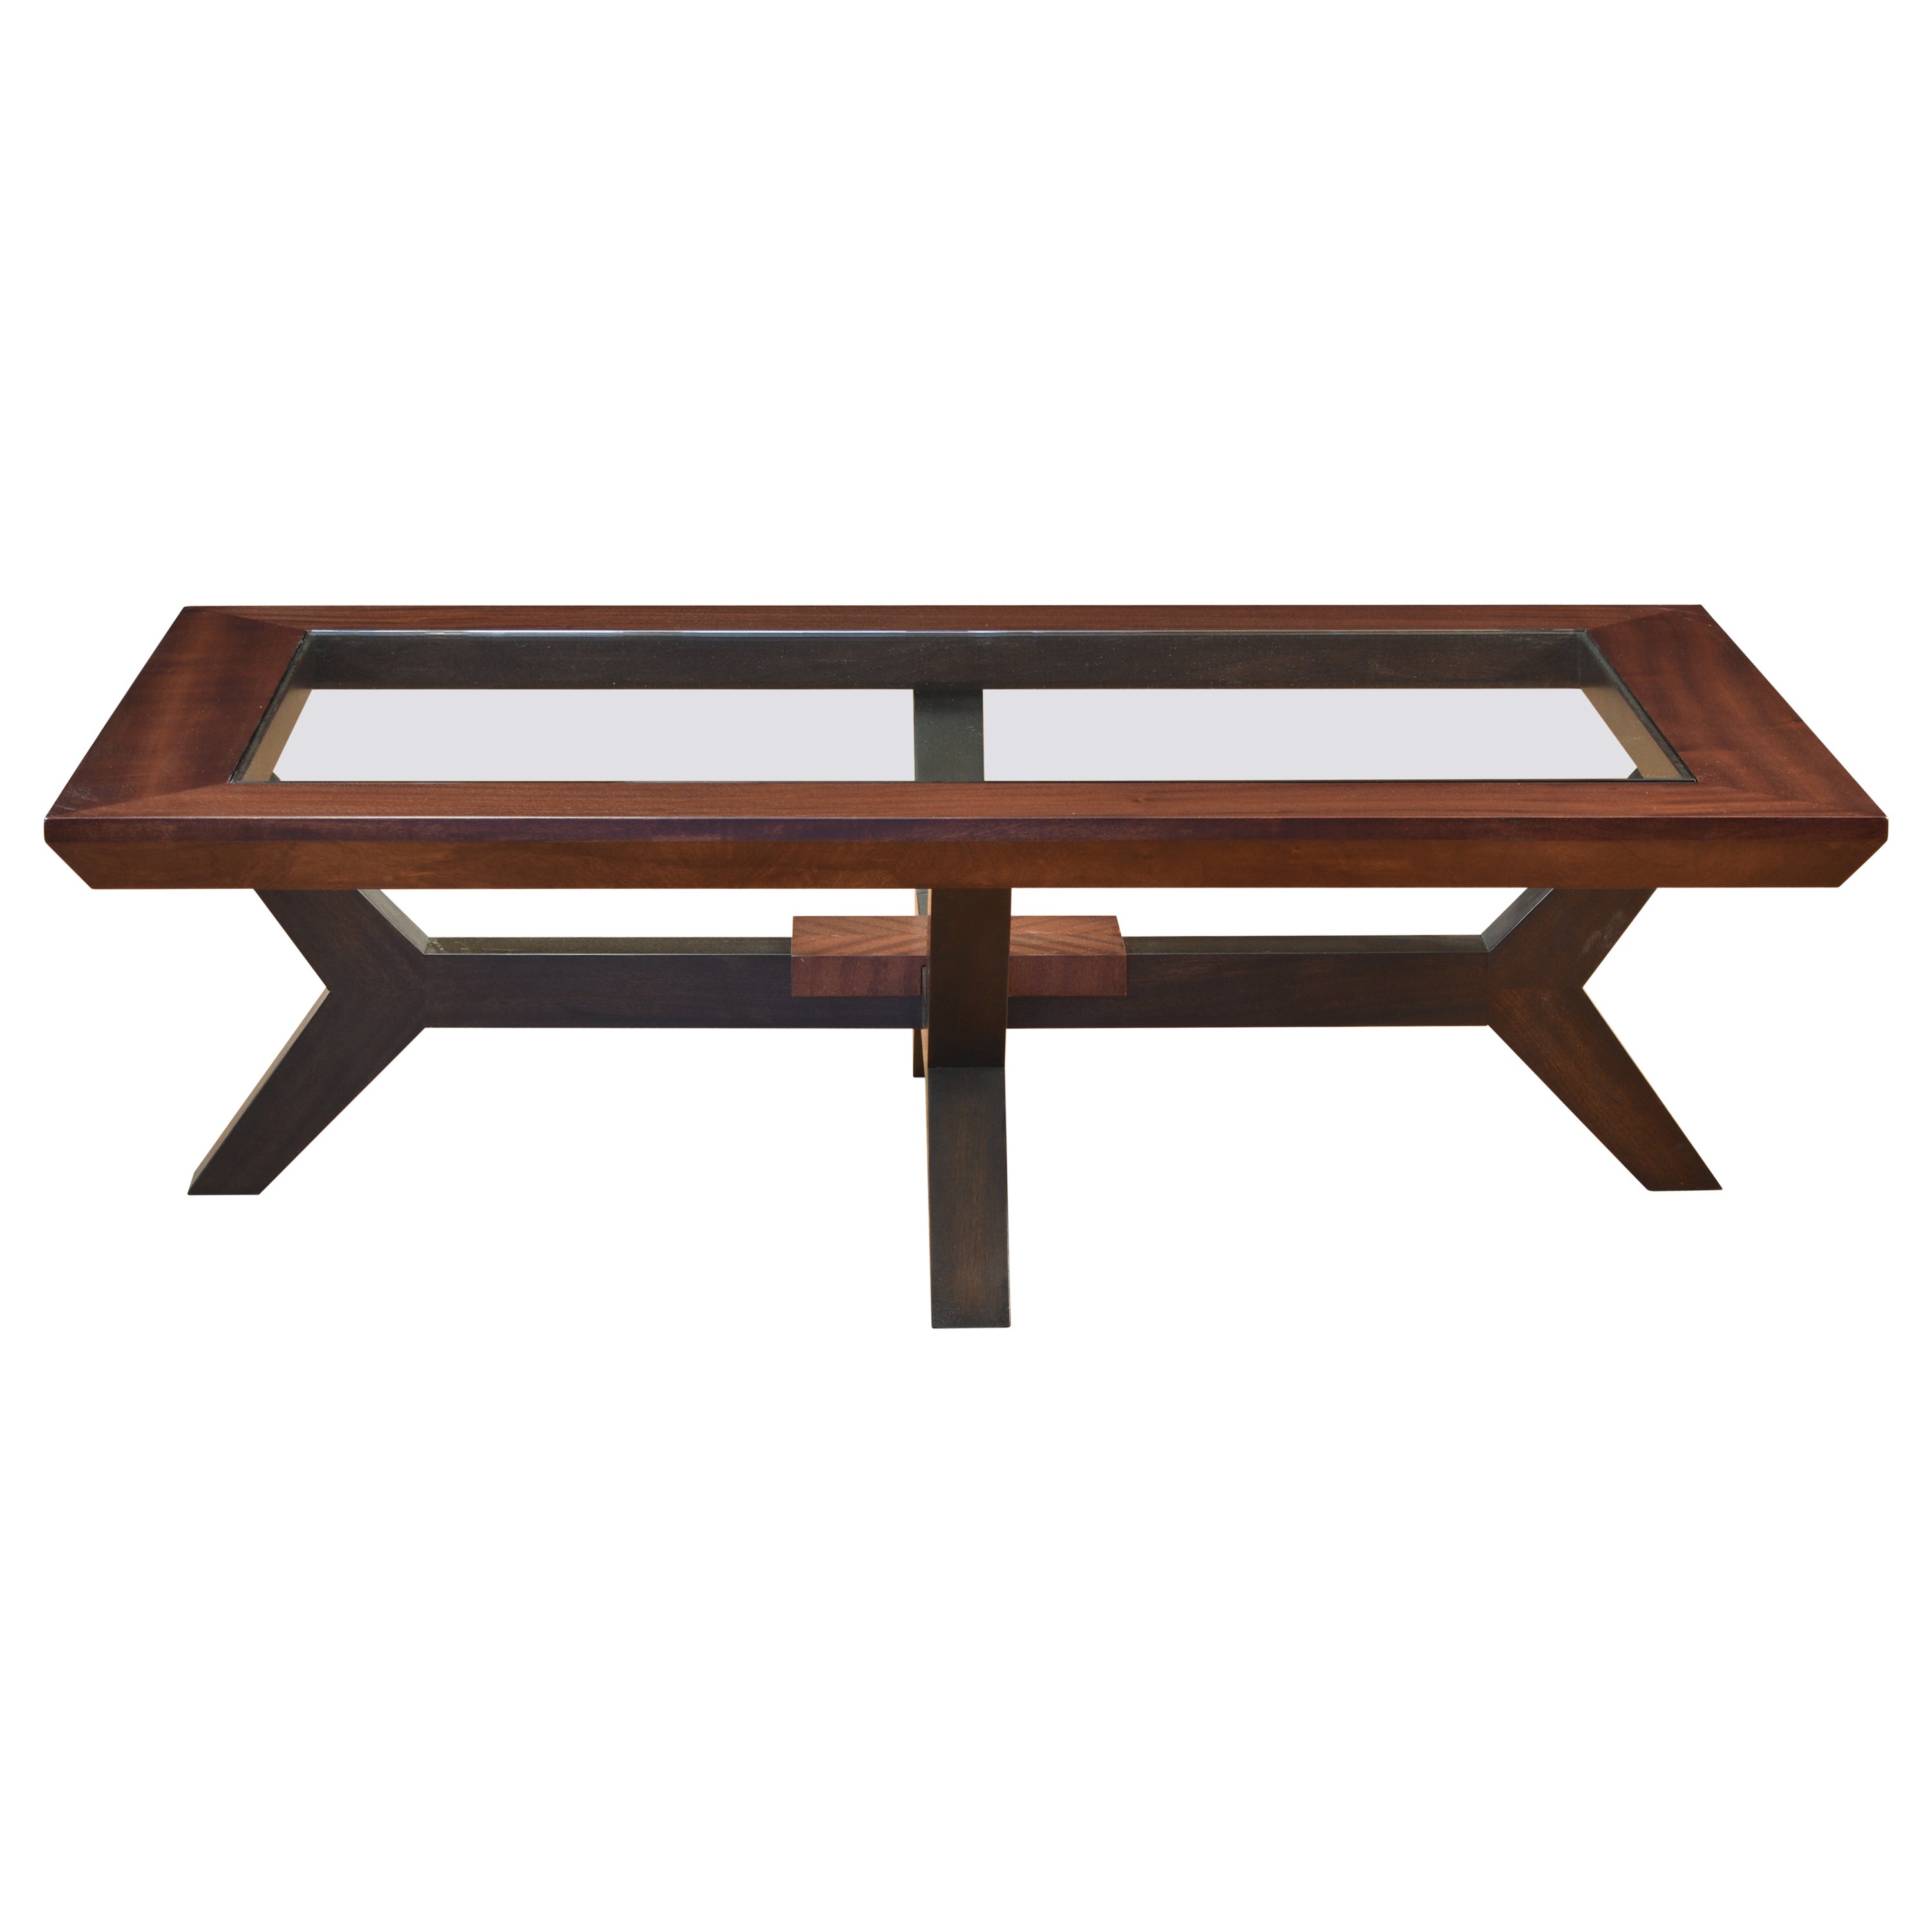 Cutean Cocktail Table, Ribbon Sapeli with Black Legs and Glass, by Lee Weitzman For Sale